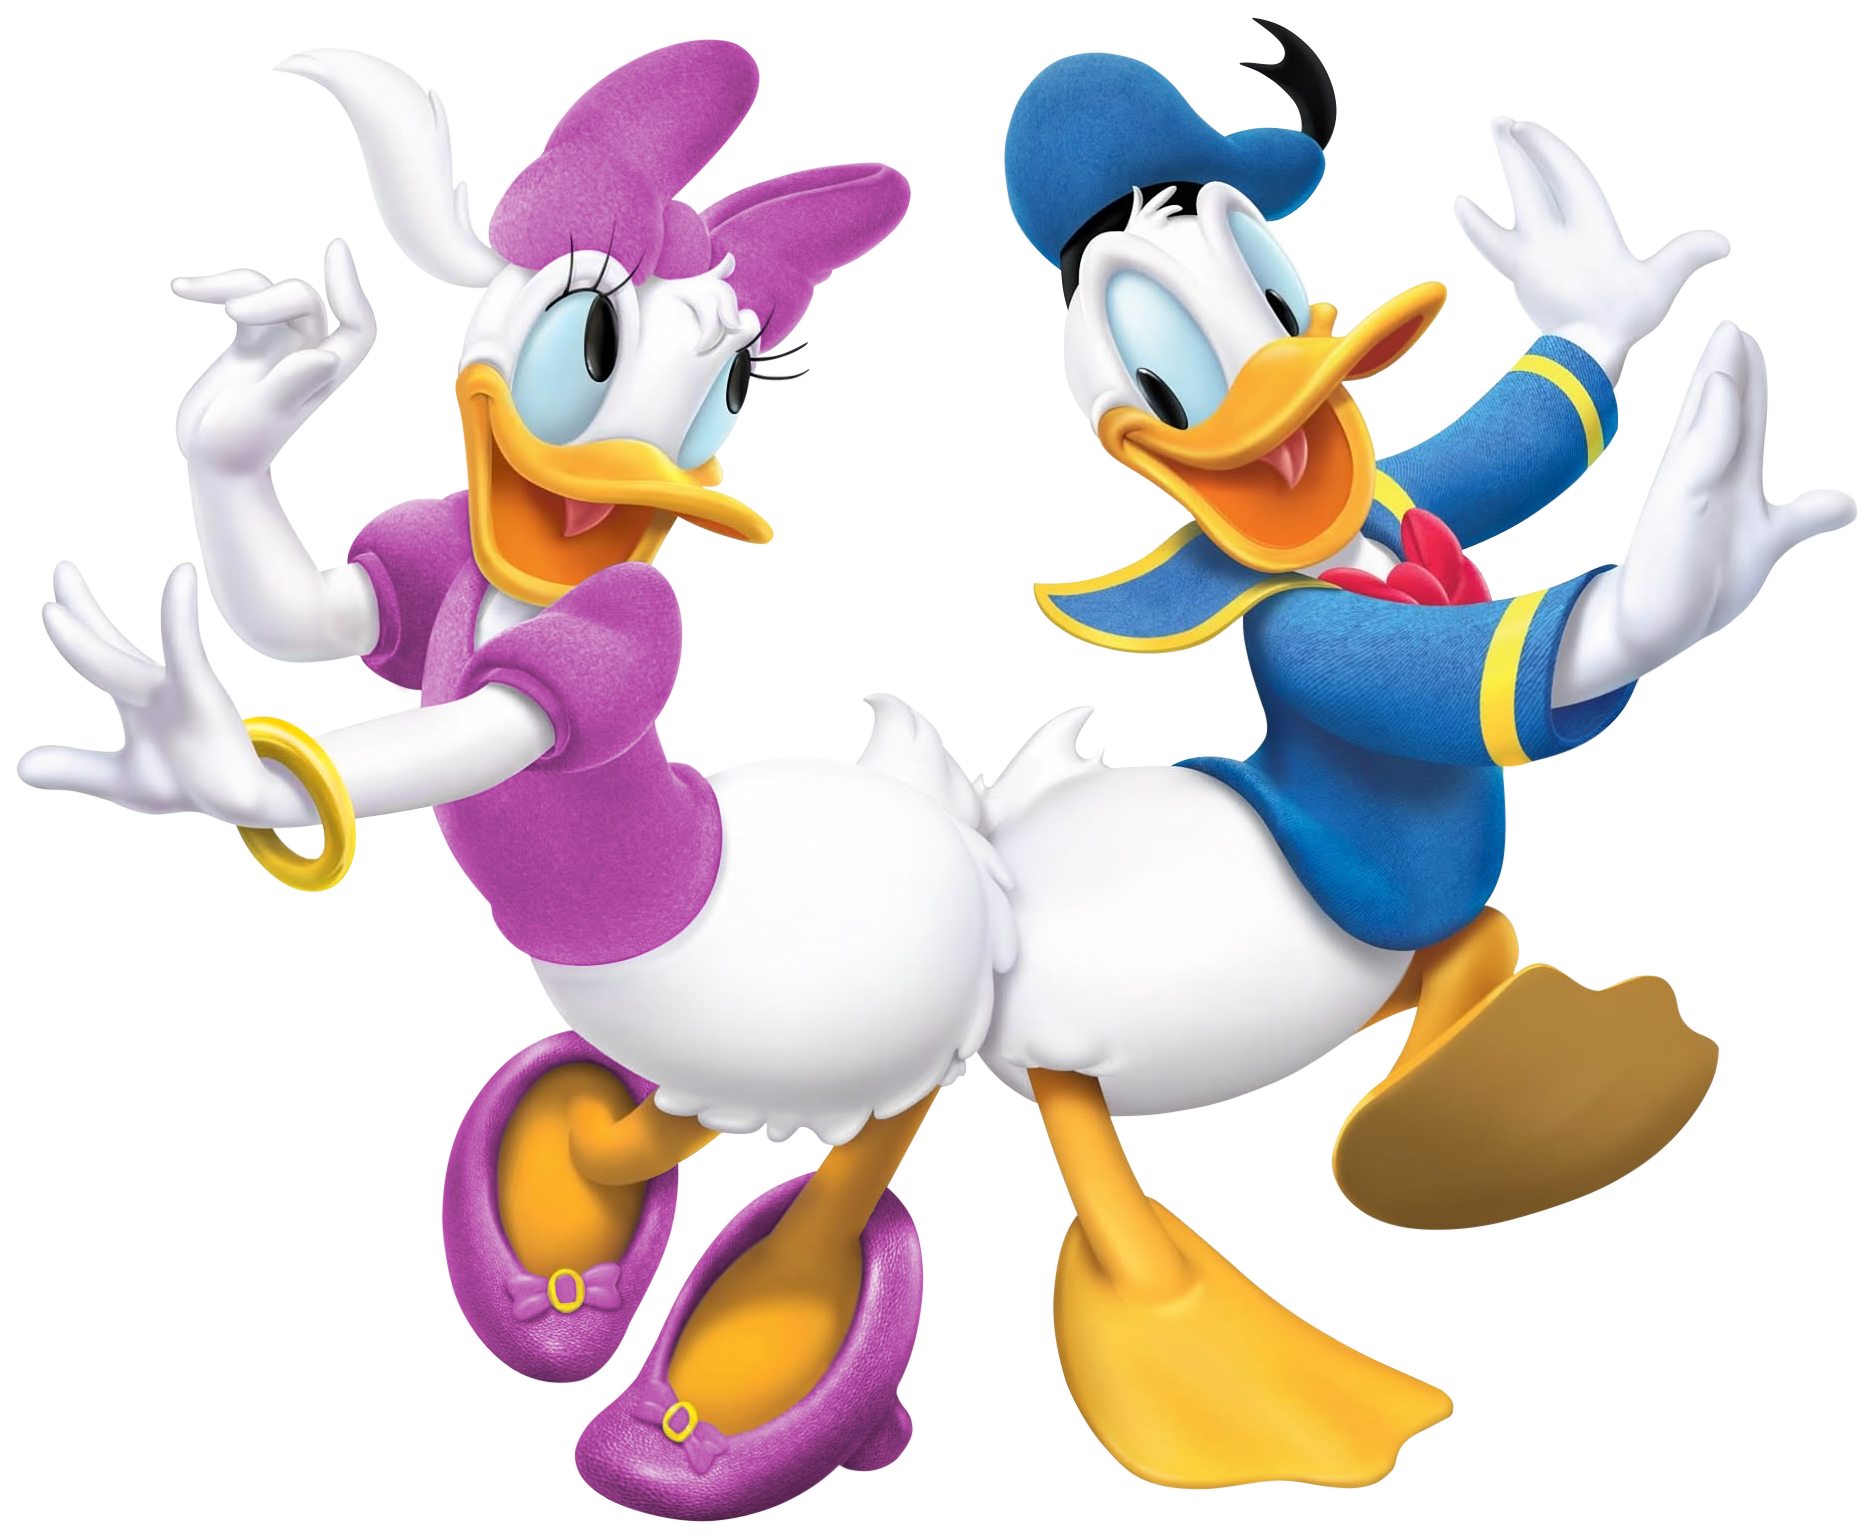 donald duck png